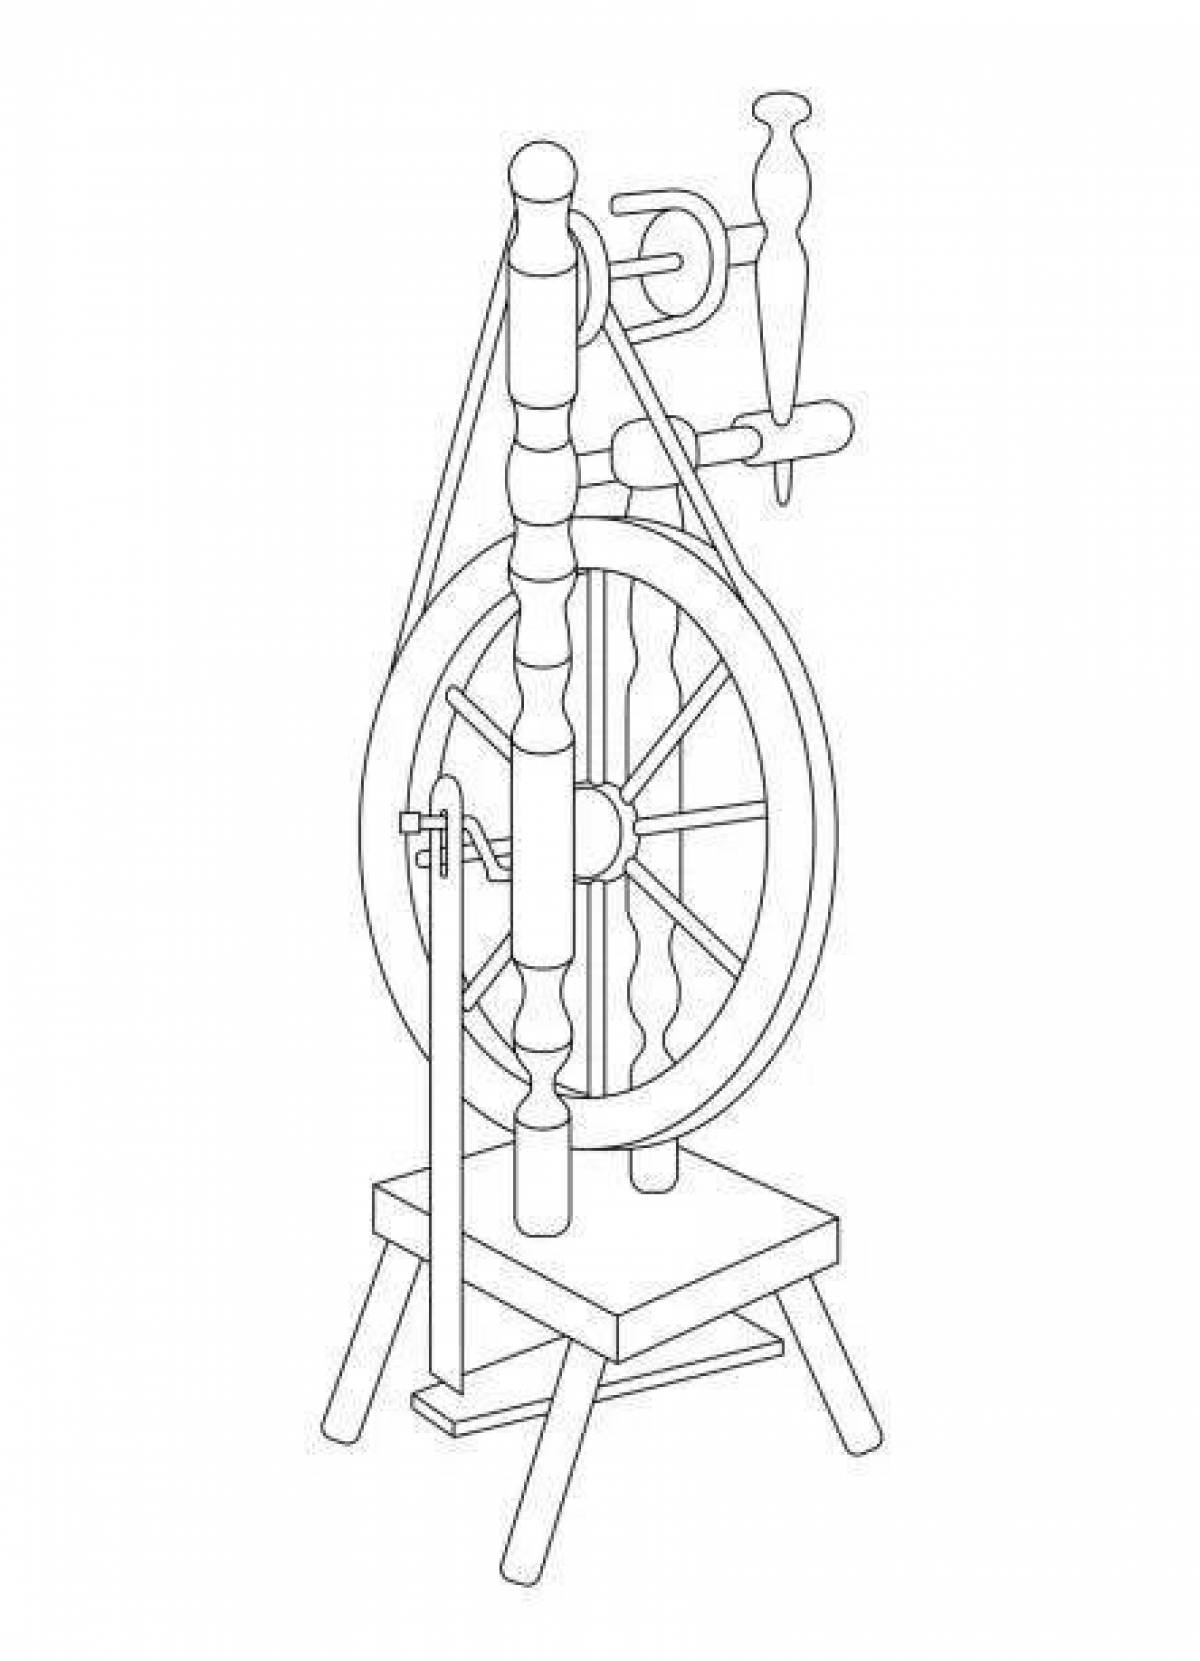 Coloring page of the spinning wheel